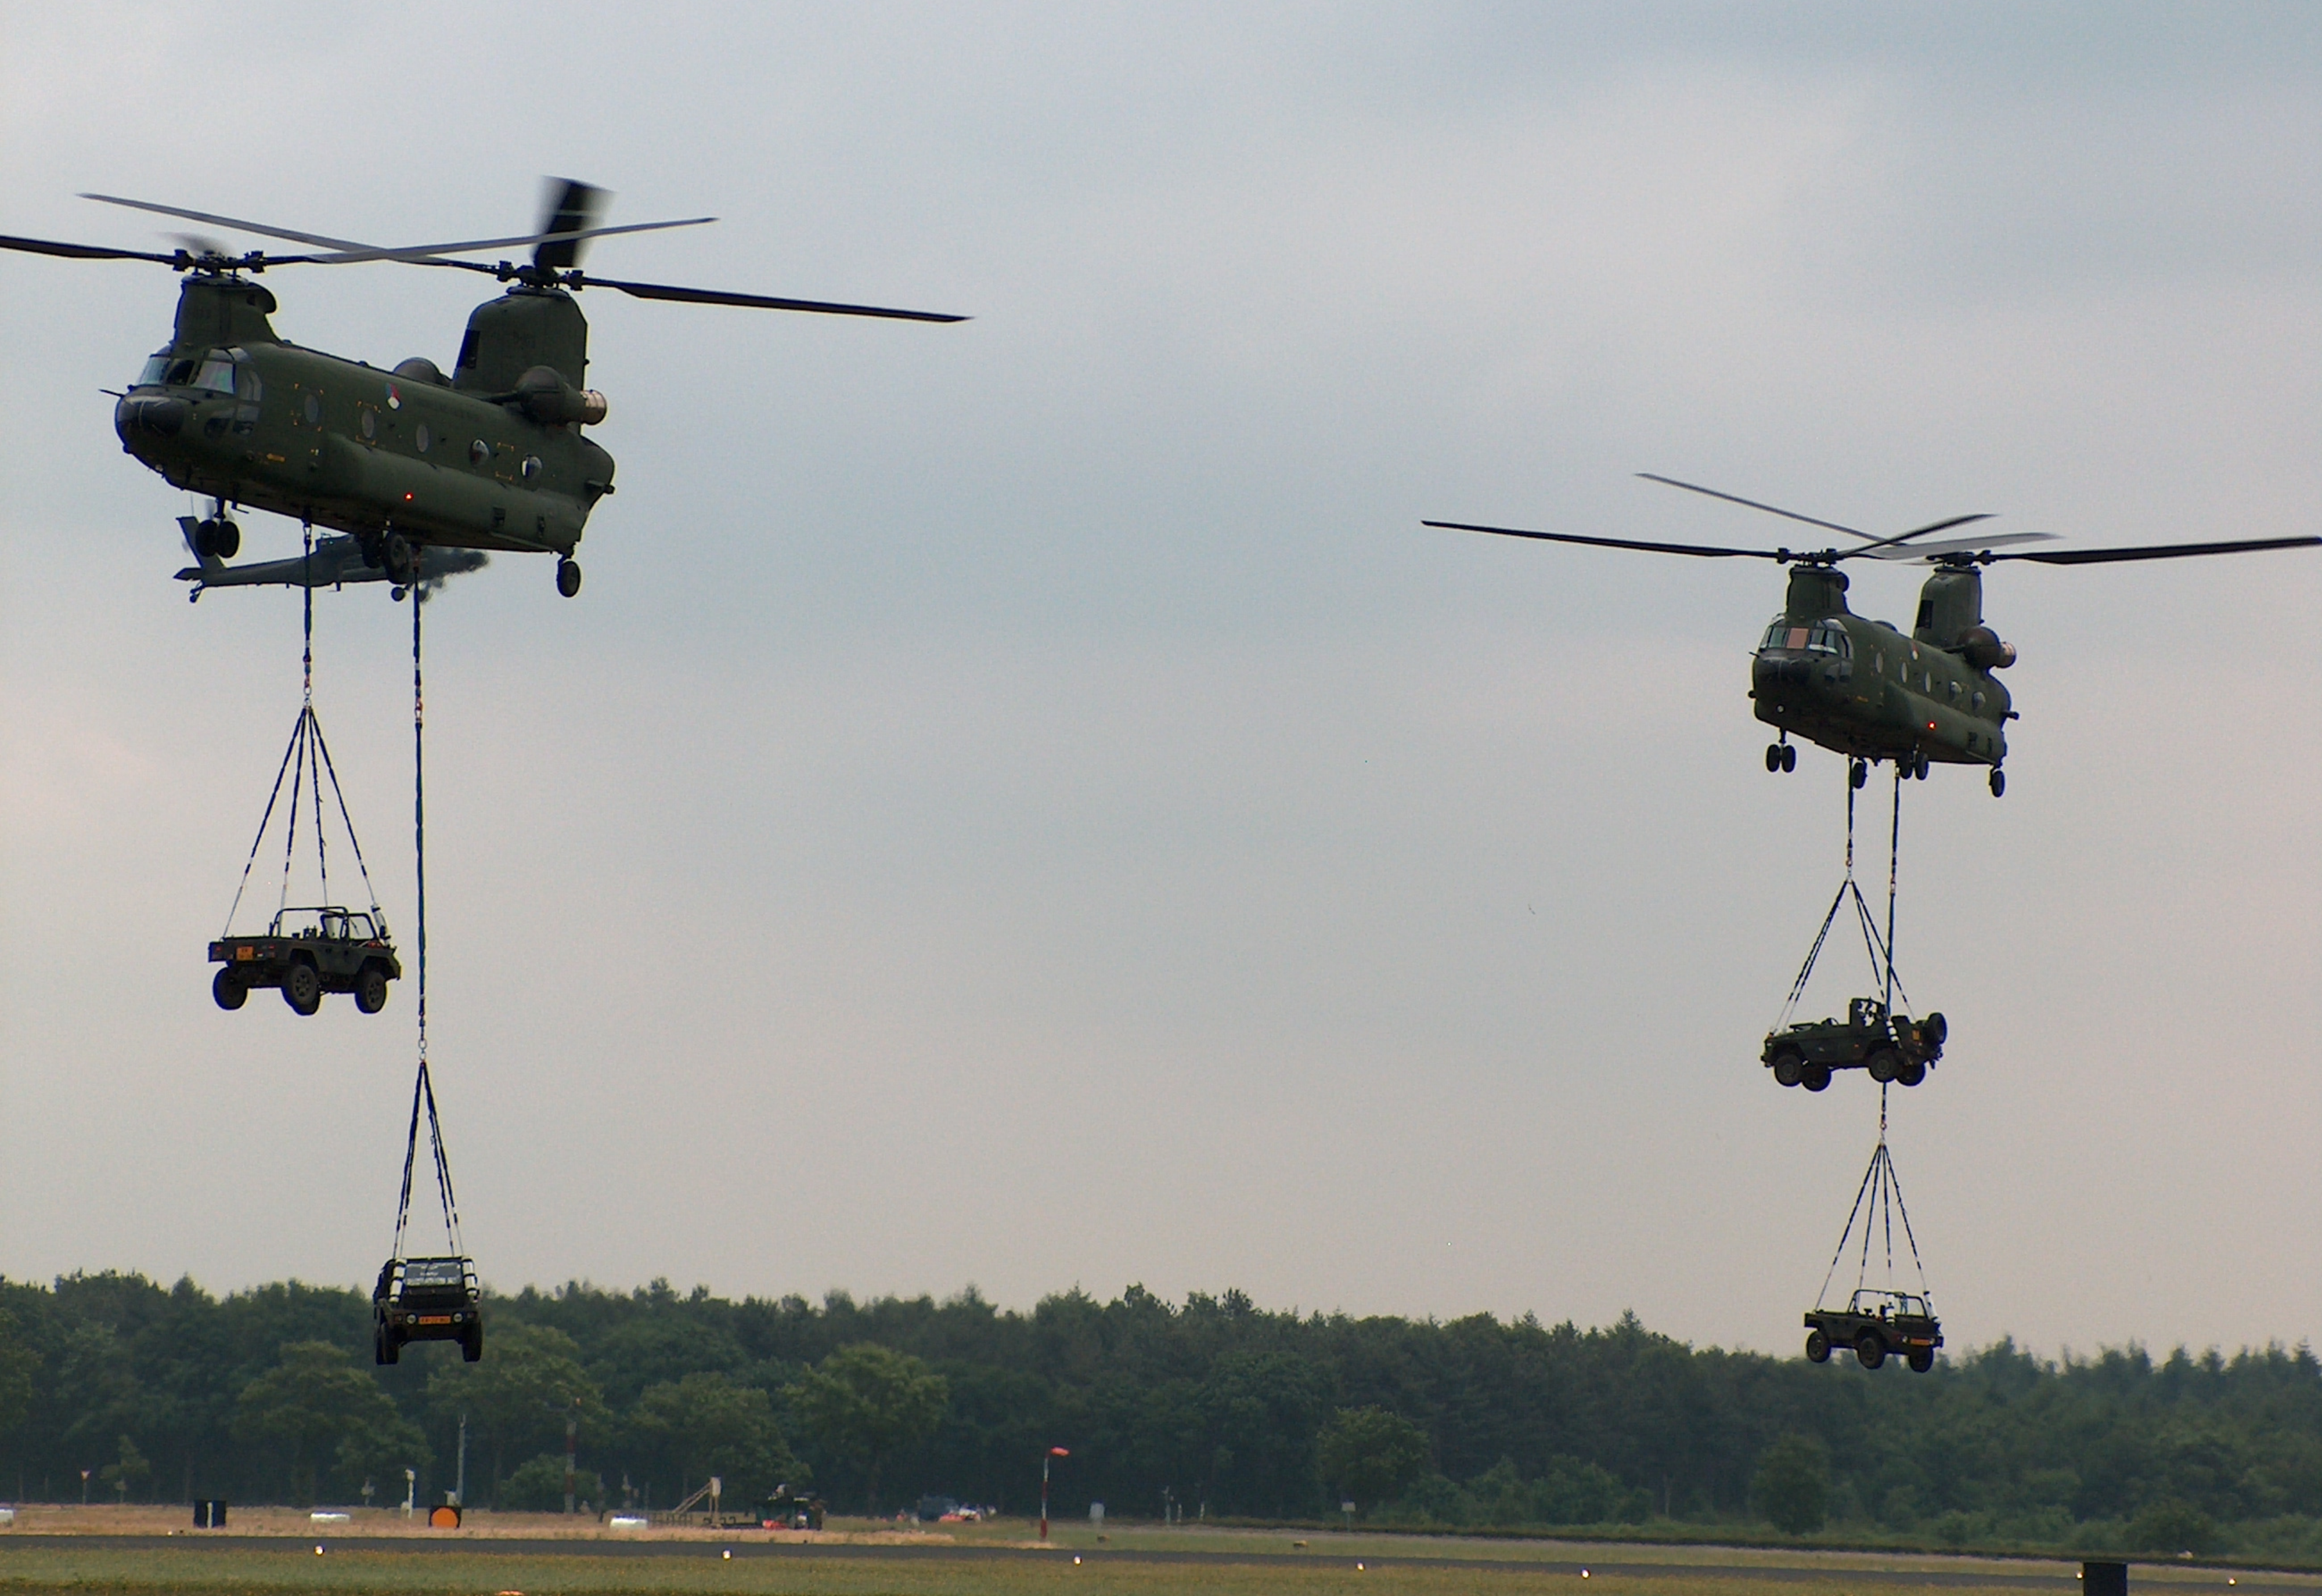 Two Chinook helicopters transporting defence land vehicles across a field